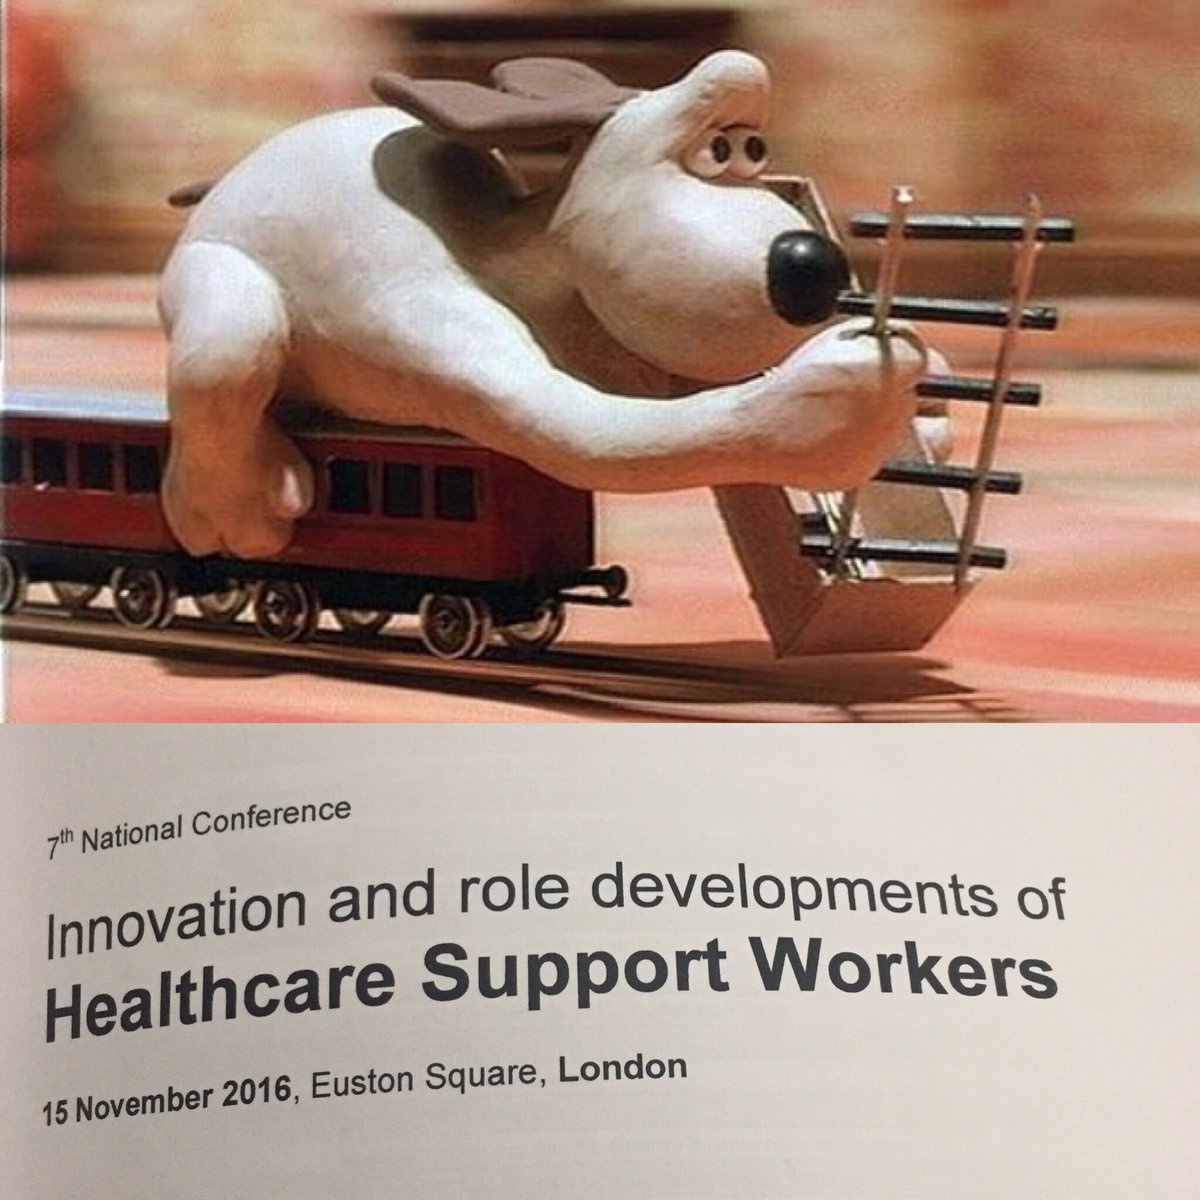 @HCSWconf g8t day discussing possibility & progress for HCSW nationally. MAs, formal ed, AP roles #innovationiskey #layingthetrackaswego 💪